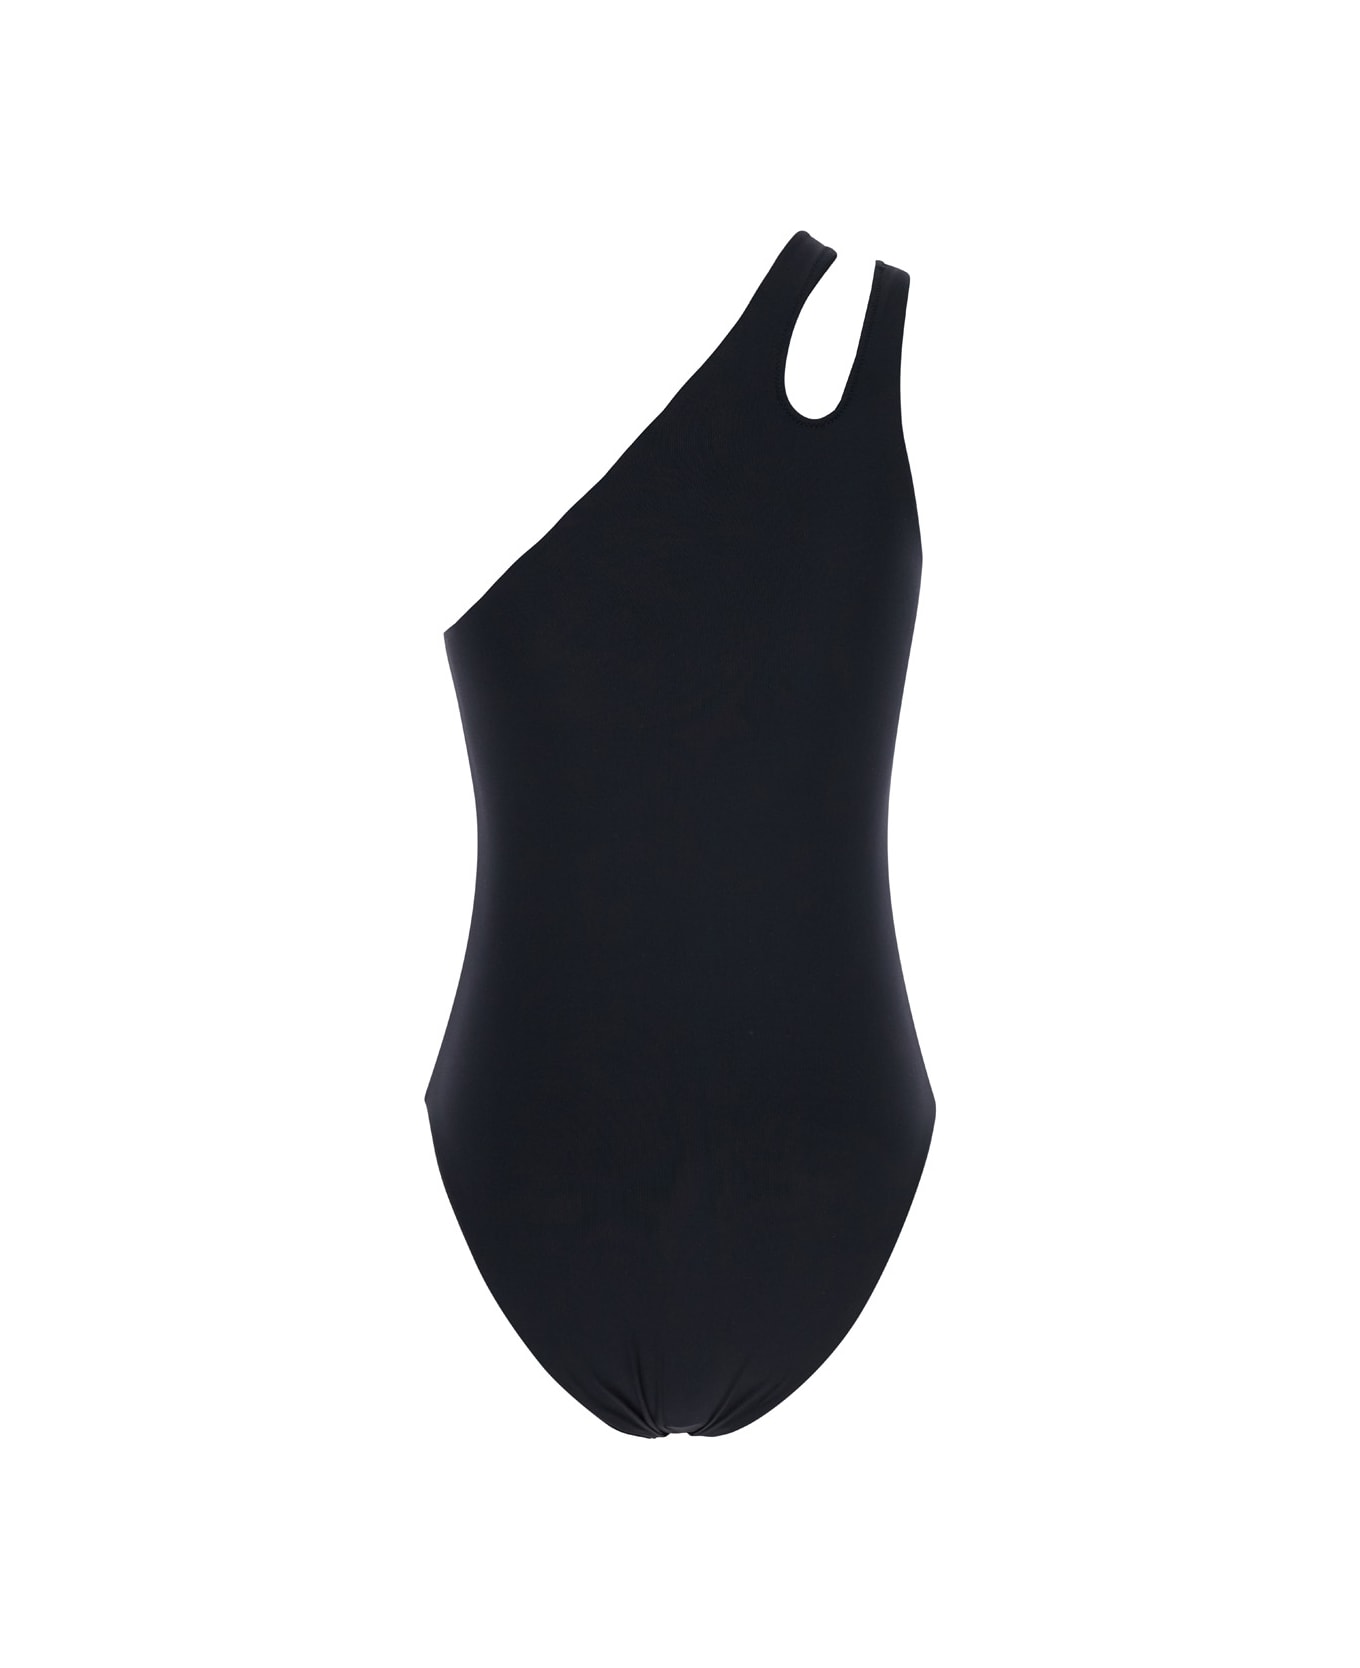 Federica Tosi Black Cut Out Swimsuit In Techno Fabric Stretch Woman - Black 水着